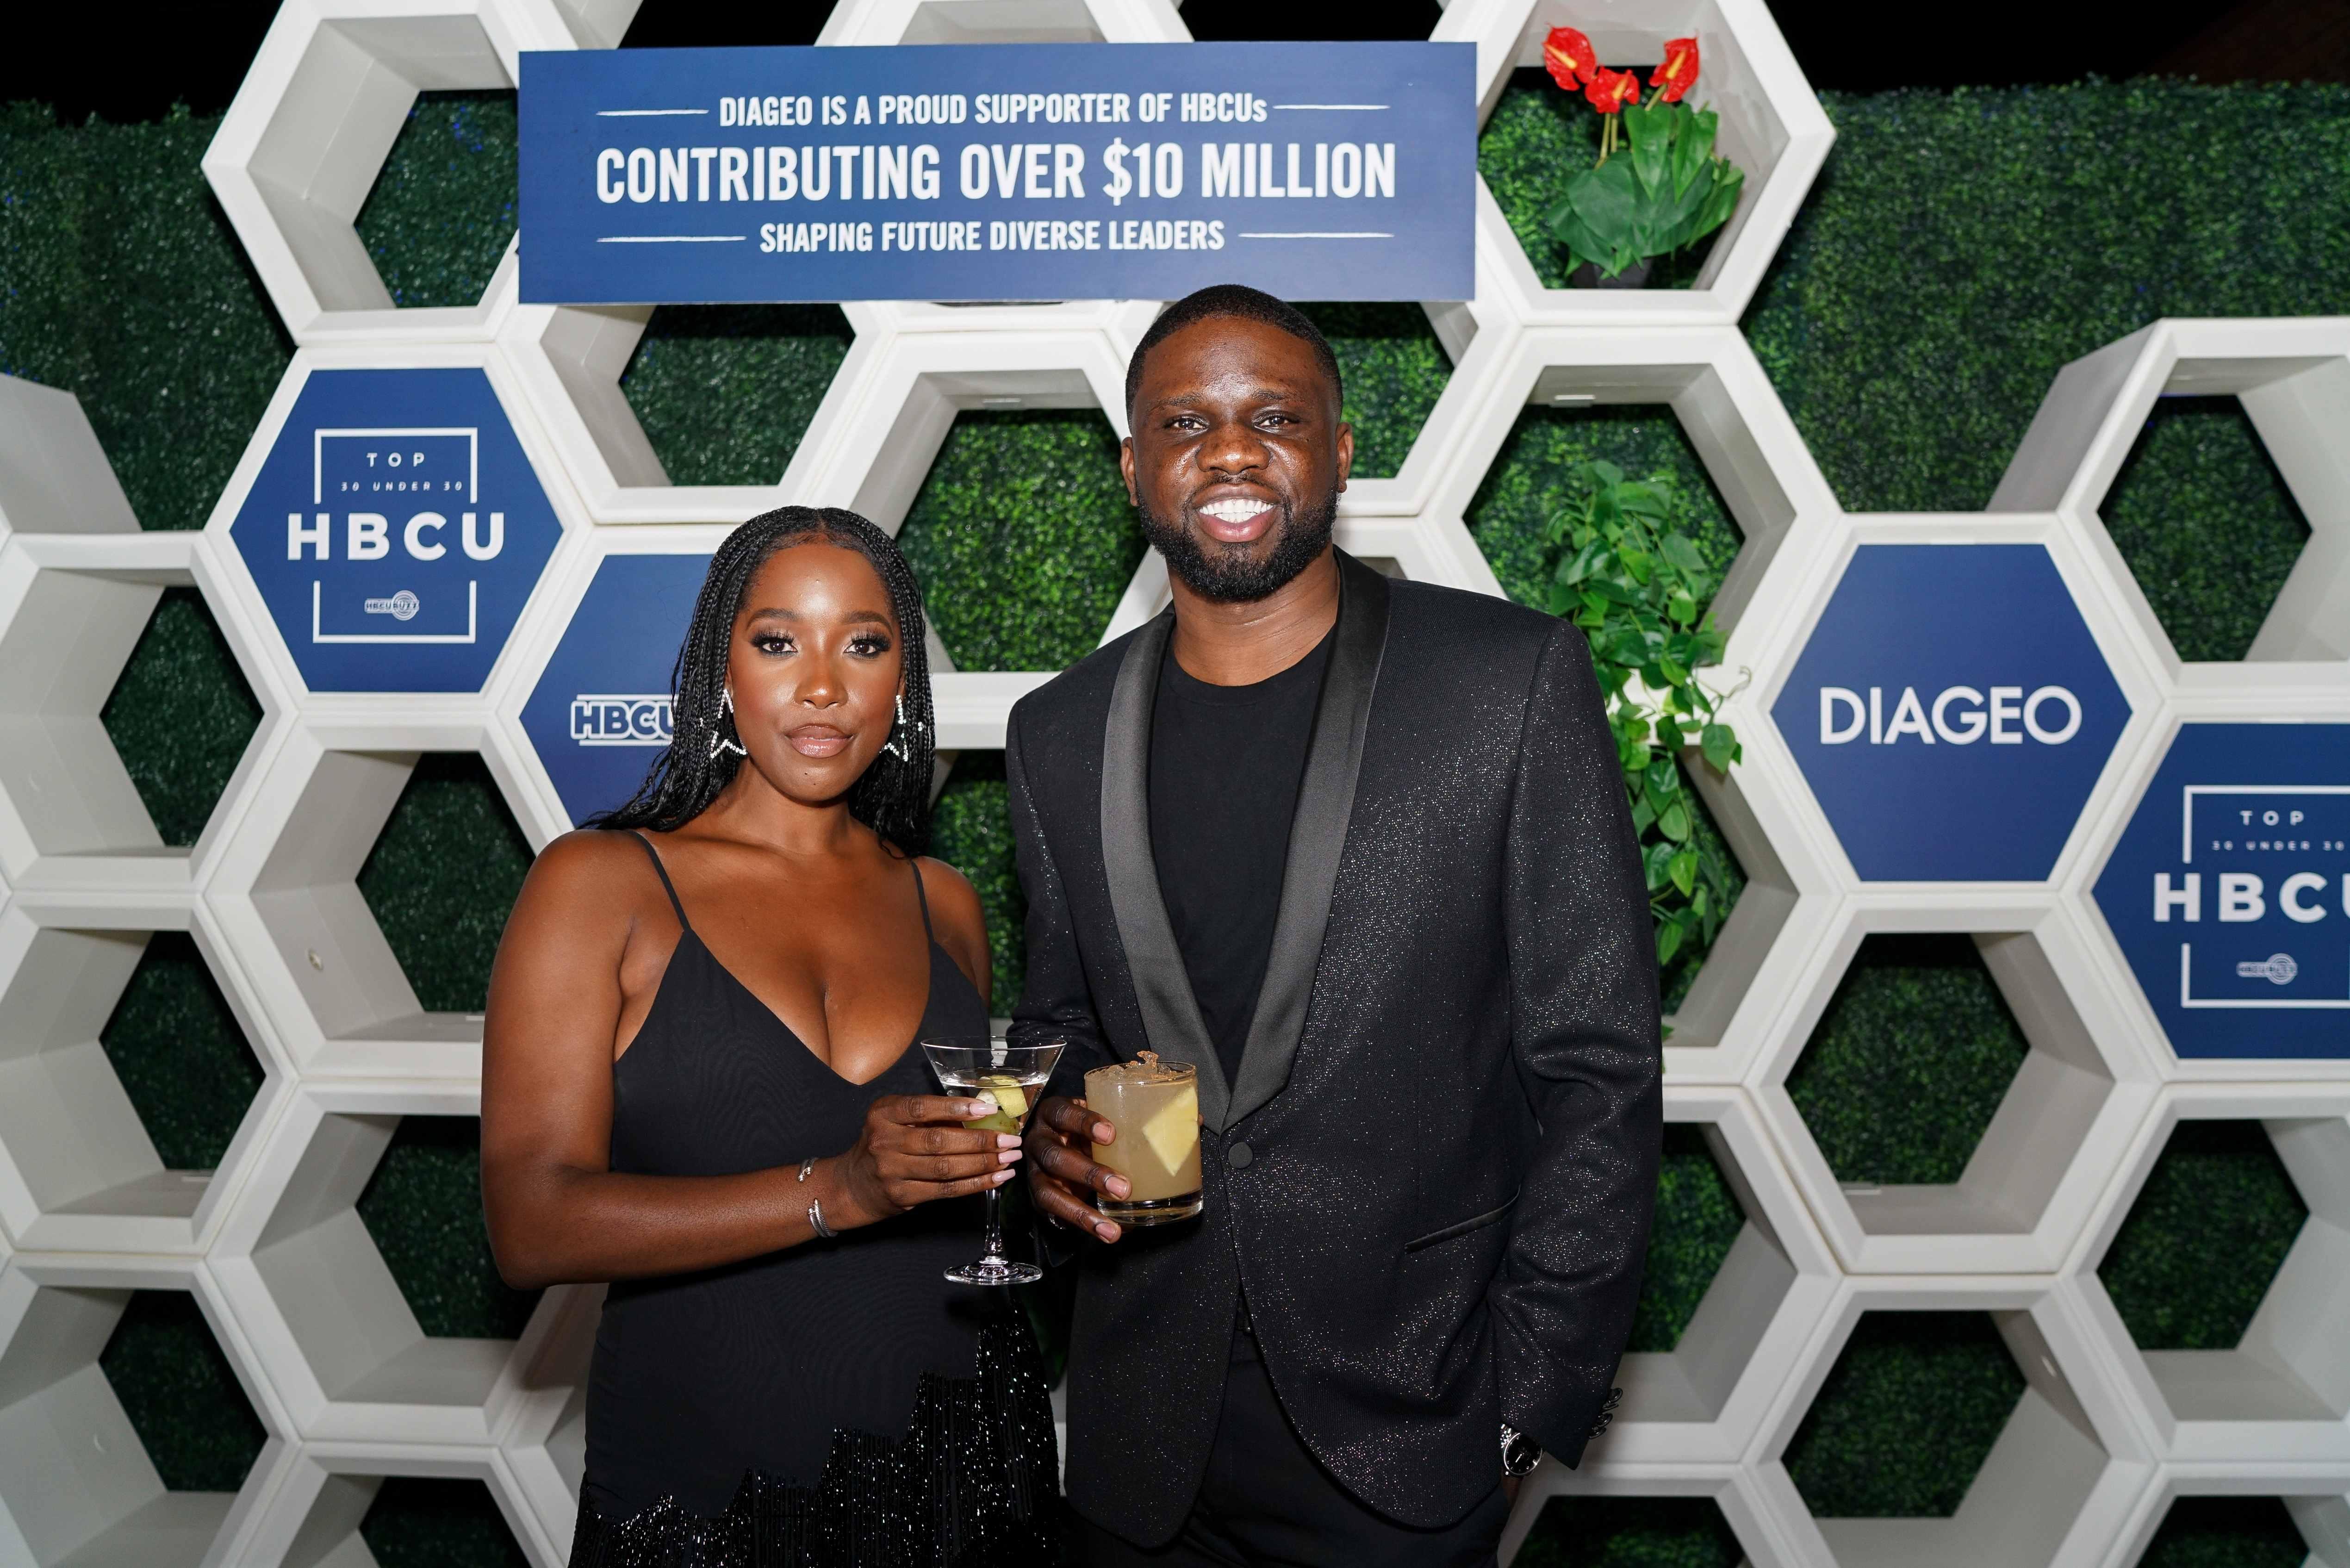 actress ashley blaine featherson jenkins and hbcu buzz founder luke anthony lawal jr toast to black excellence during hbcu homecoming with diageo and its brands ciroc crown royal tequila don julio and tanqueray